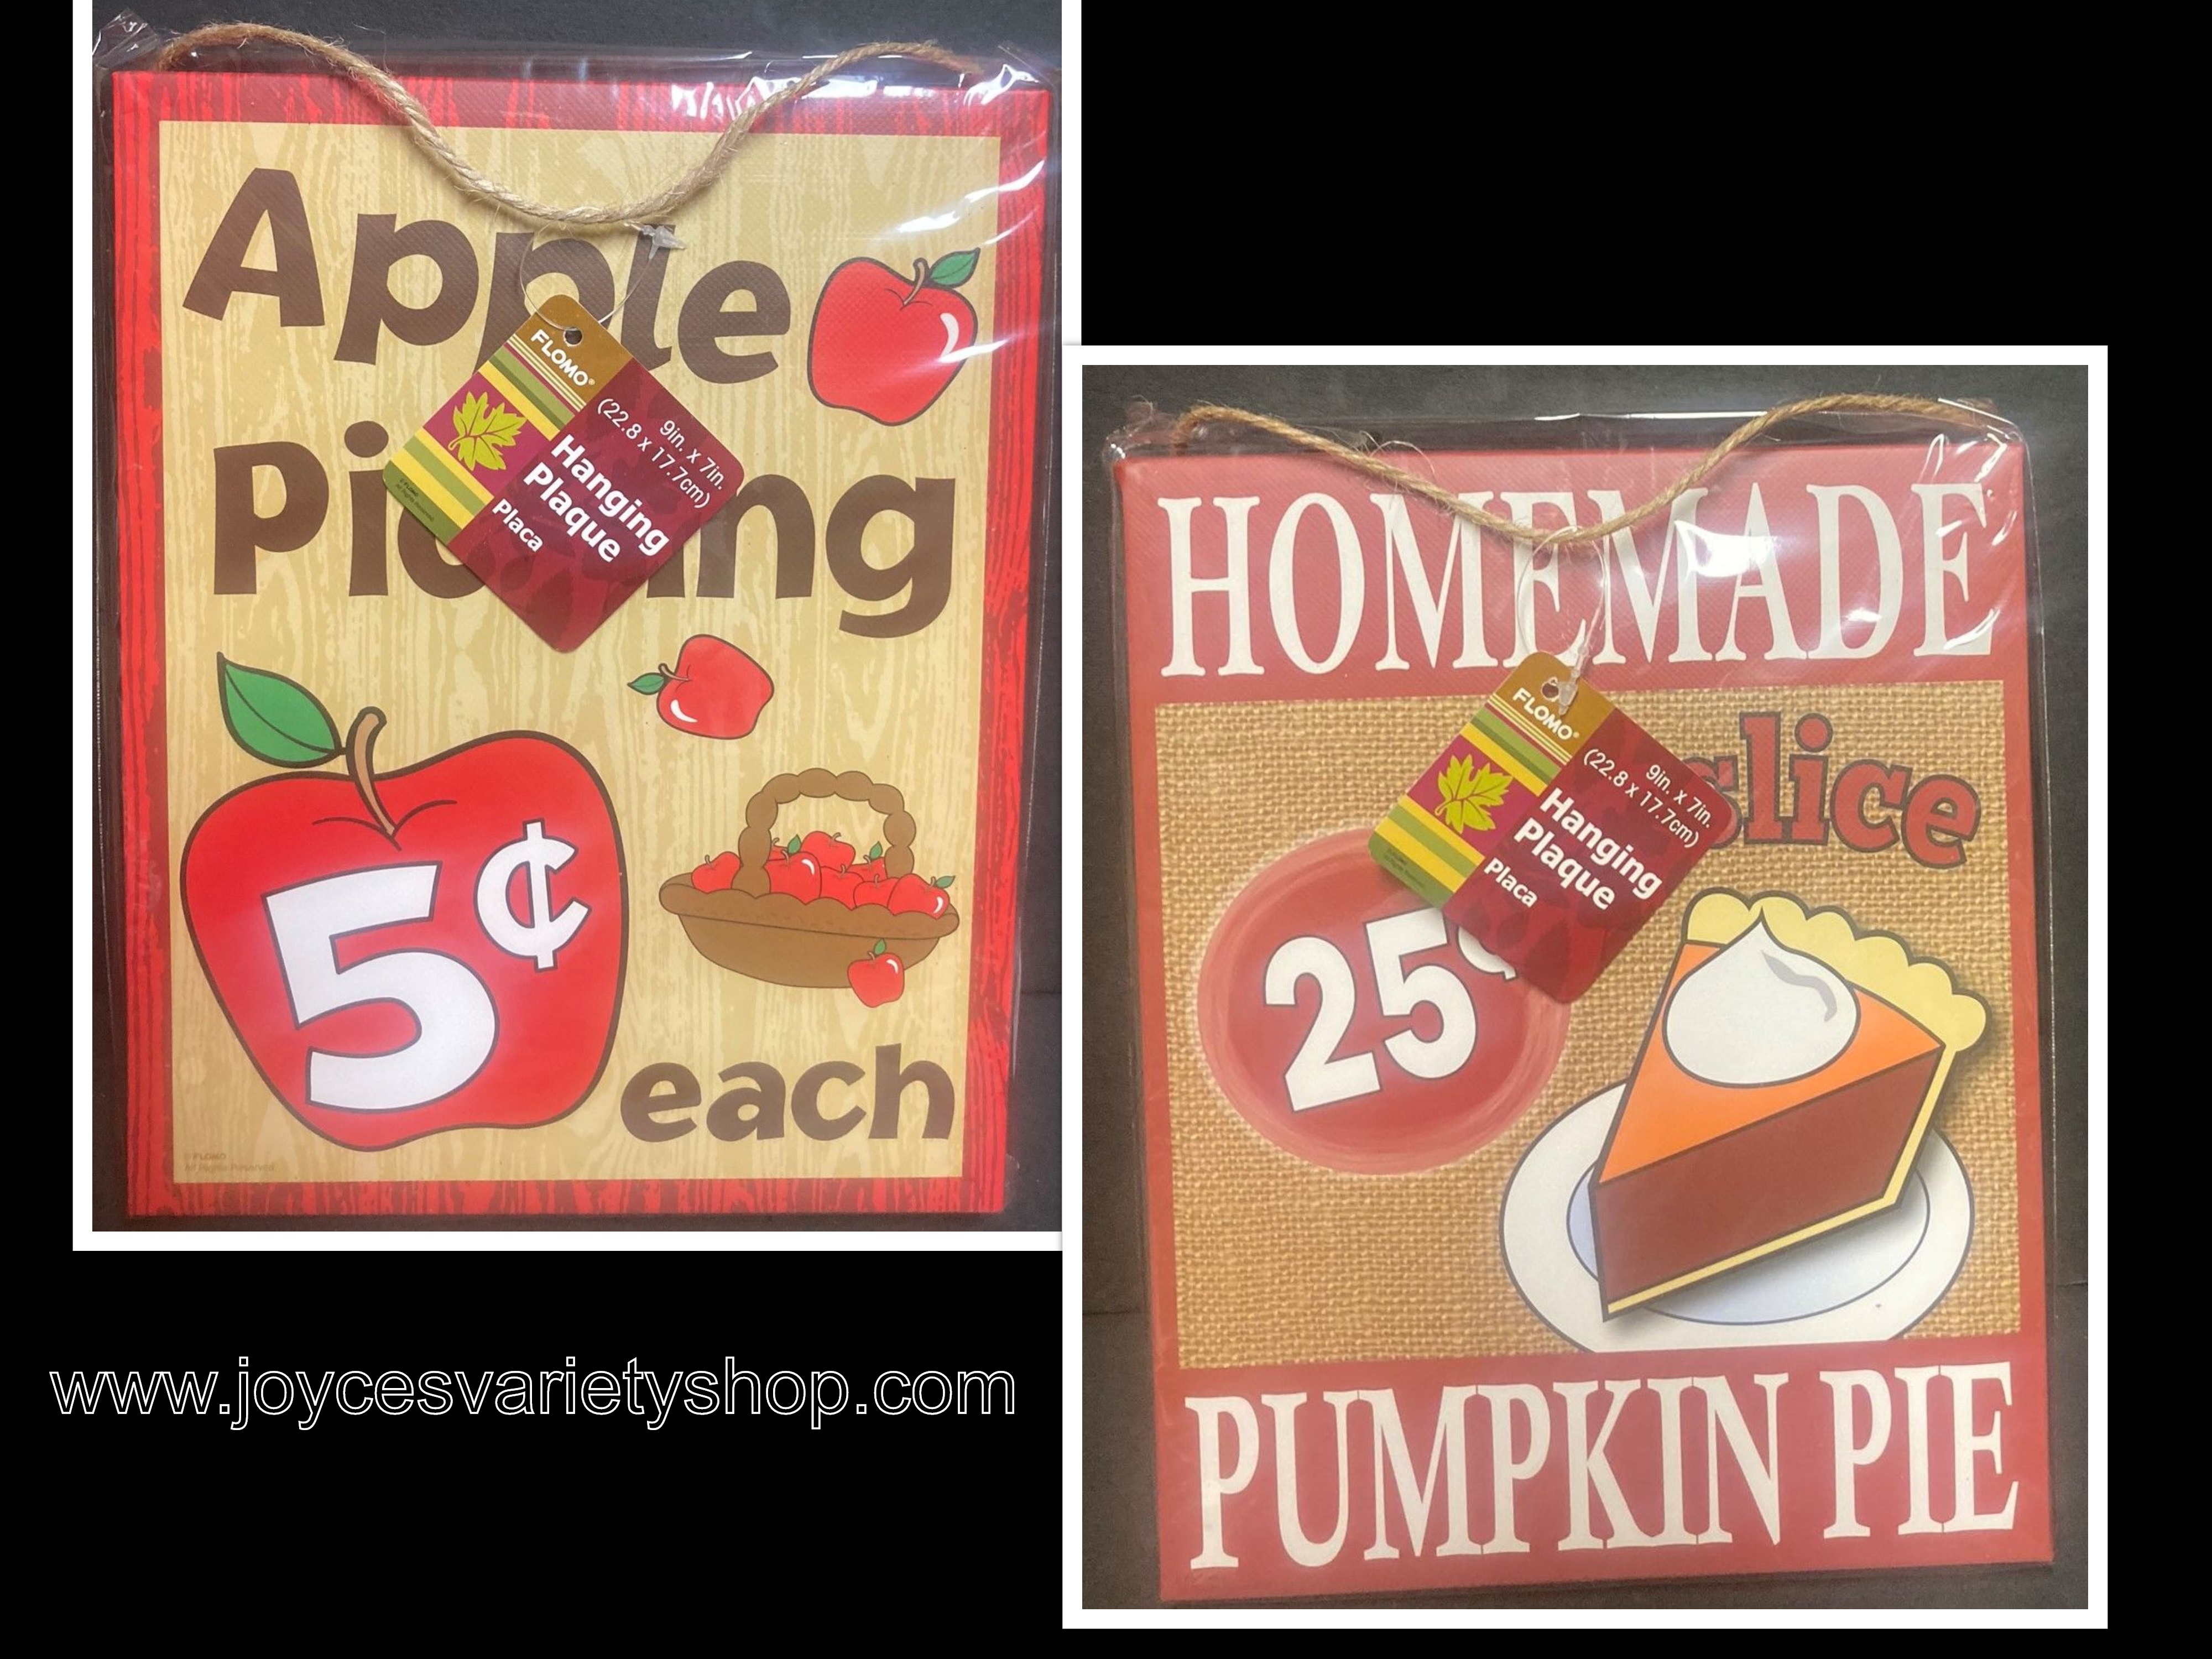 Hanging Wood Plaques Choice of Apples or Pumpkin Pie 9" x 7"